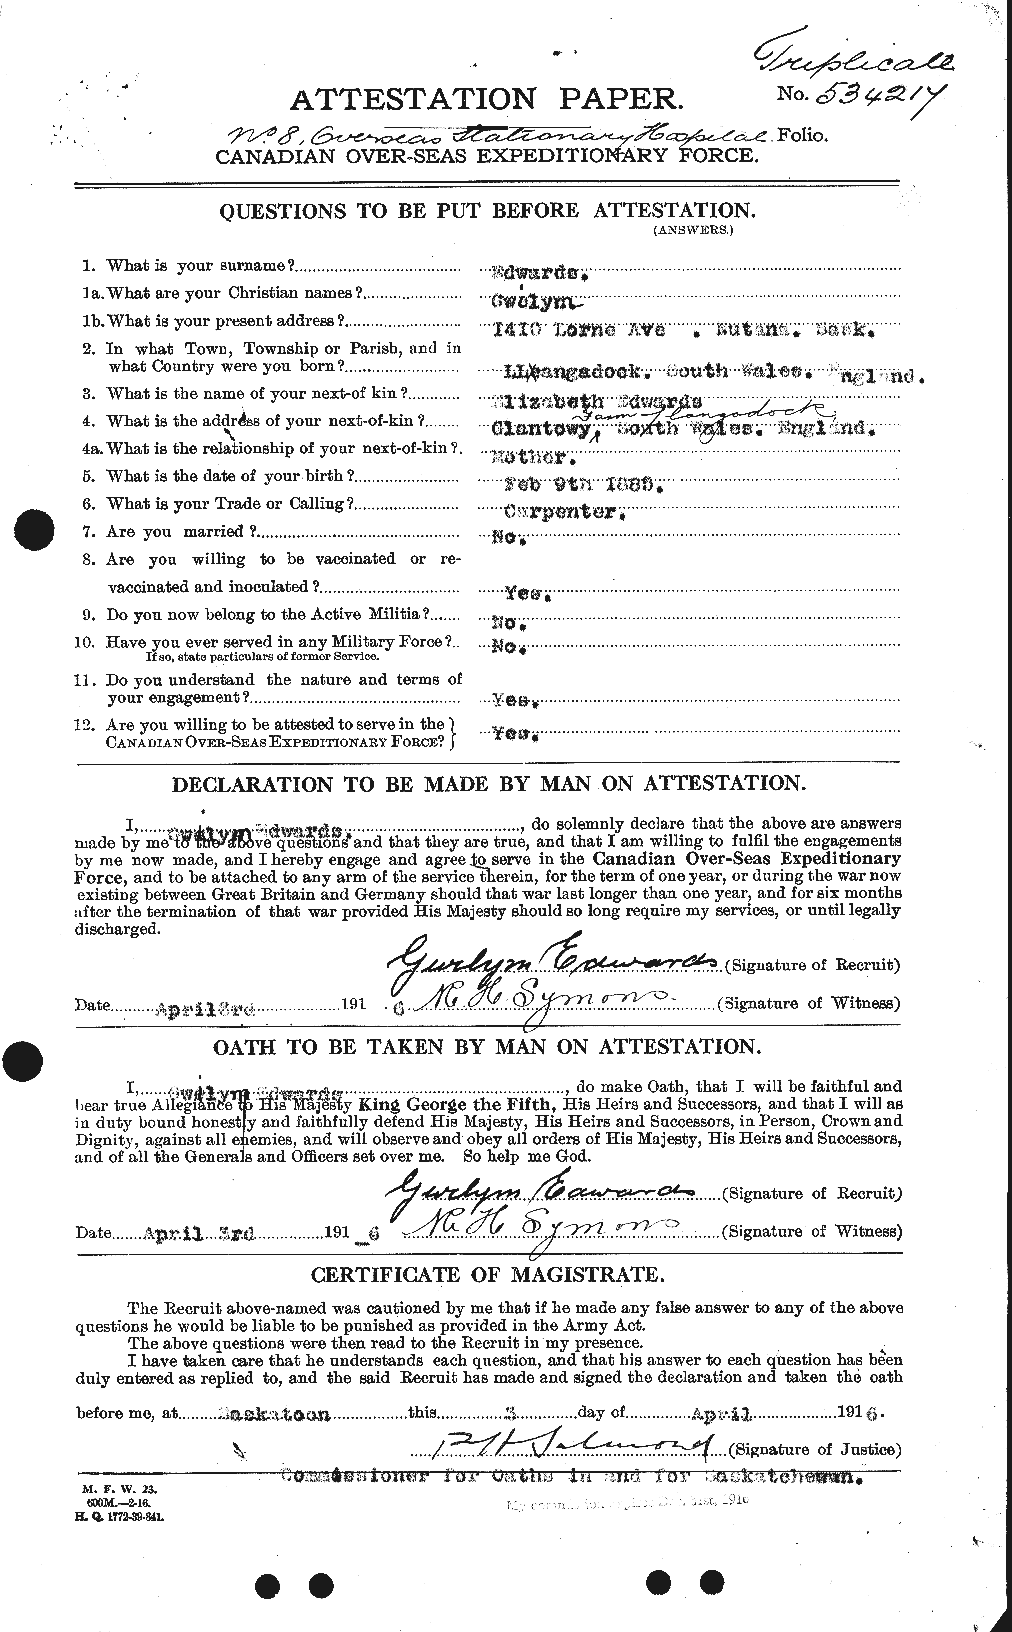 Personnel Records of the First World War - CEF 309711a